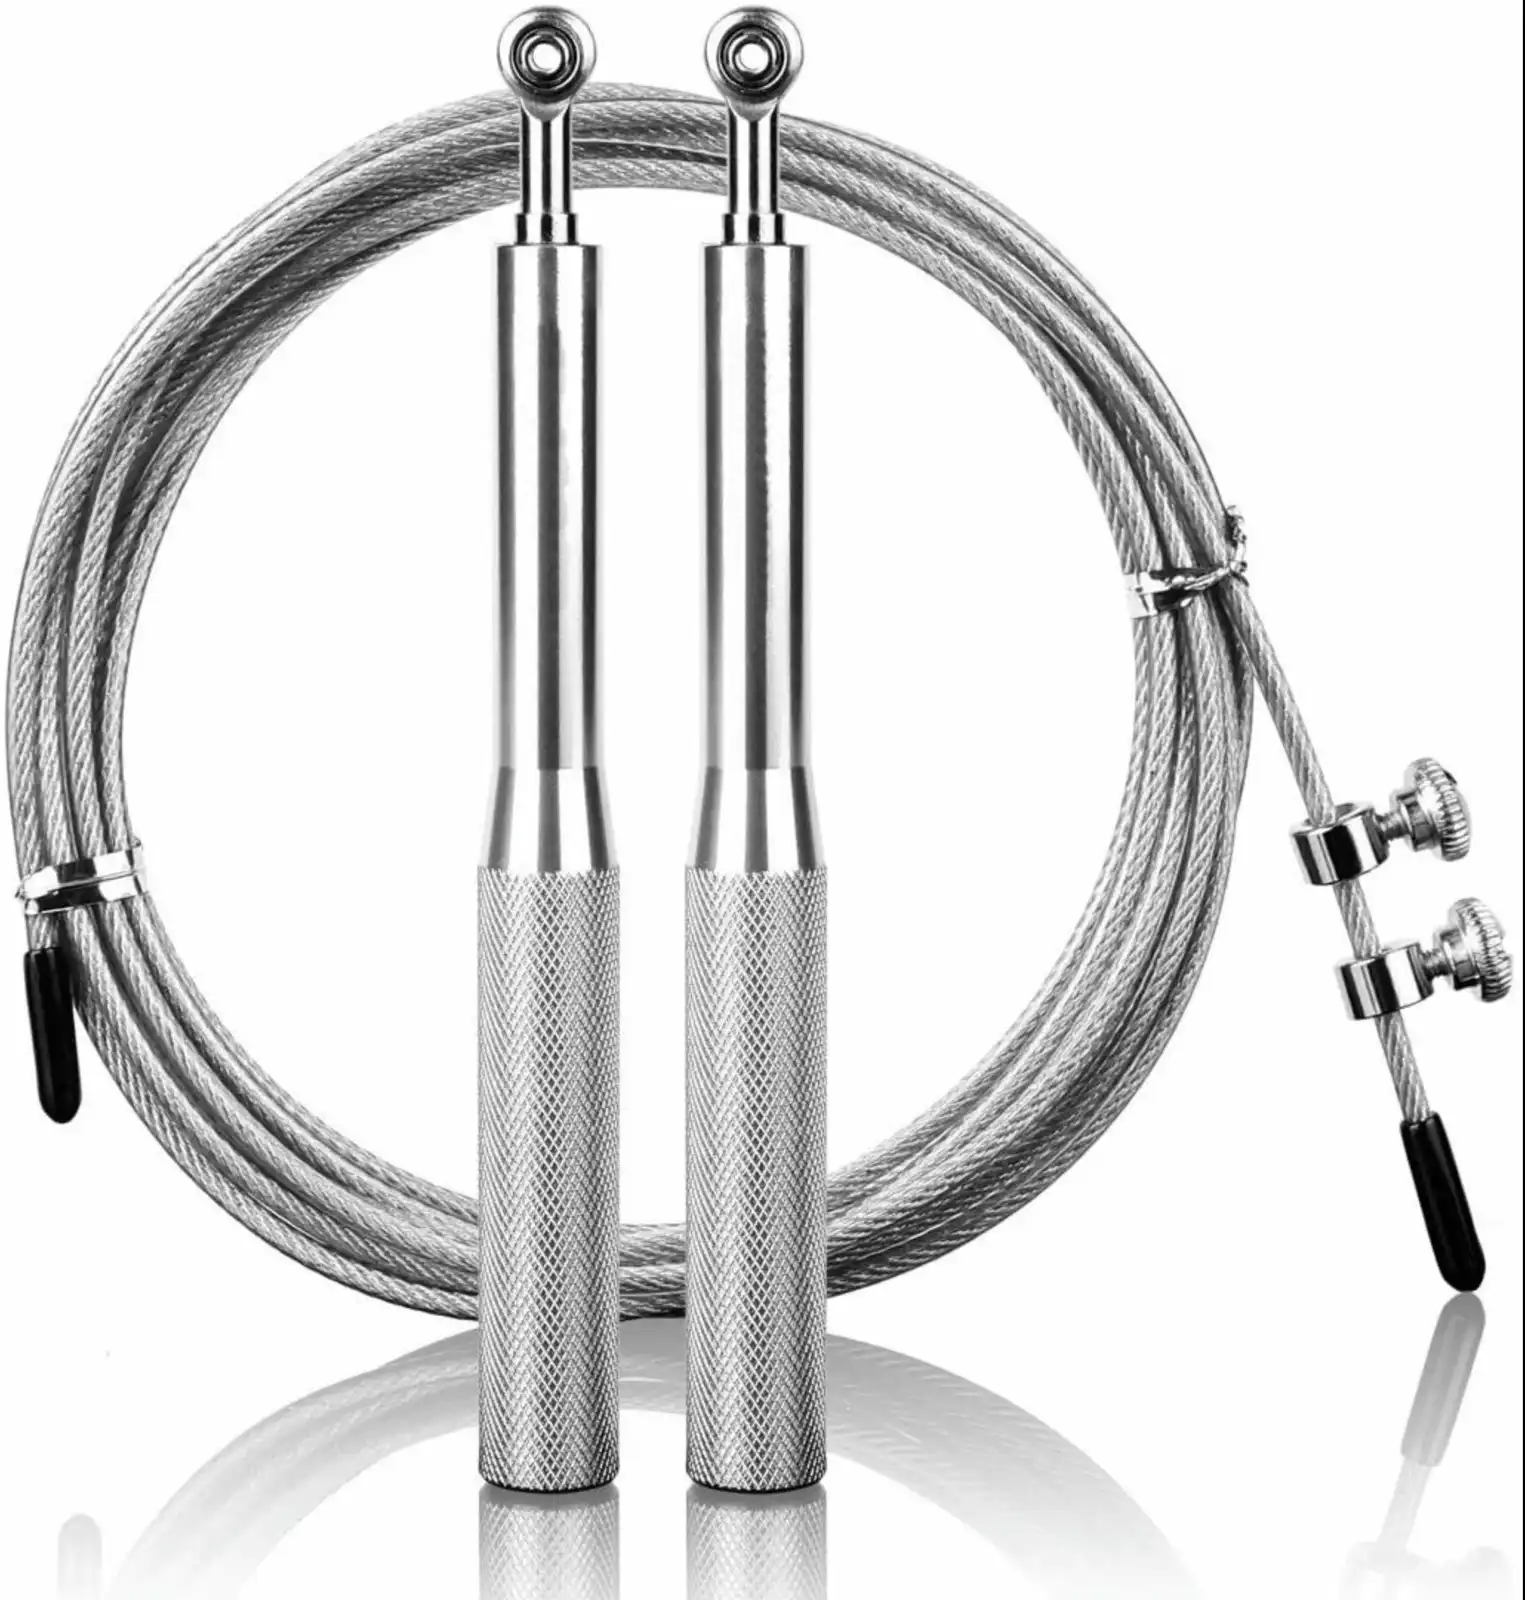 TODO Speed Ball Bearing Jump Rope w/ Anti Slip Handles Fitness Workout Exercise Boxing - Silver